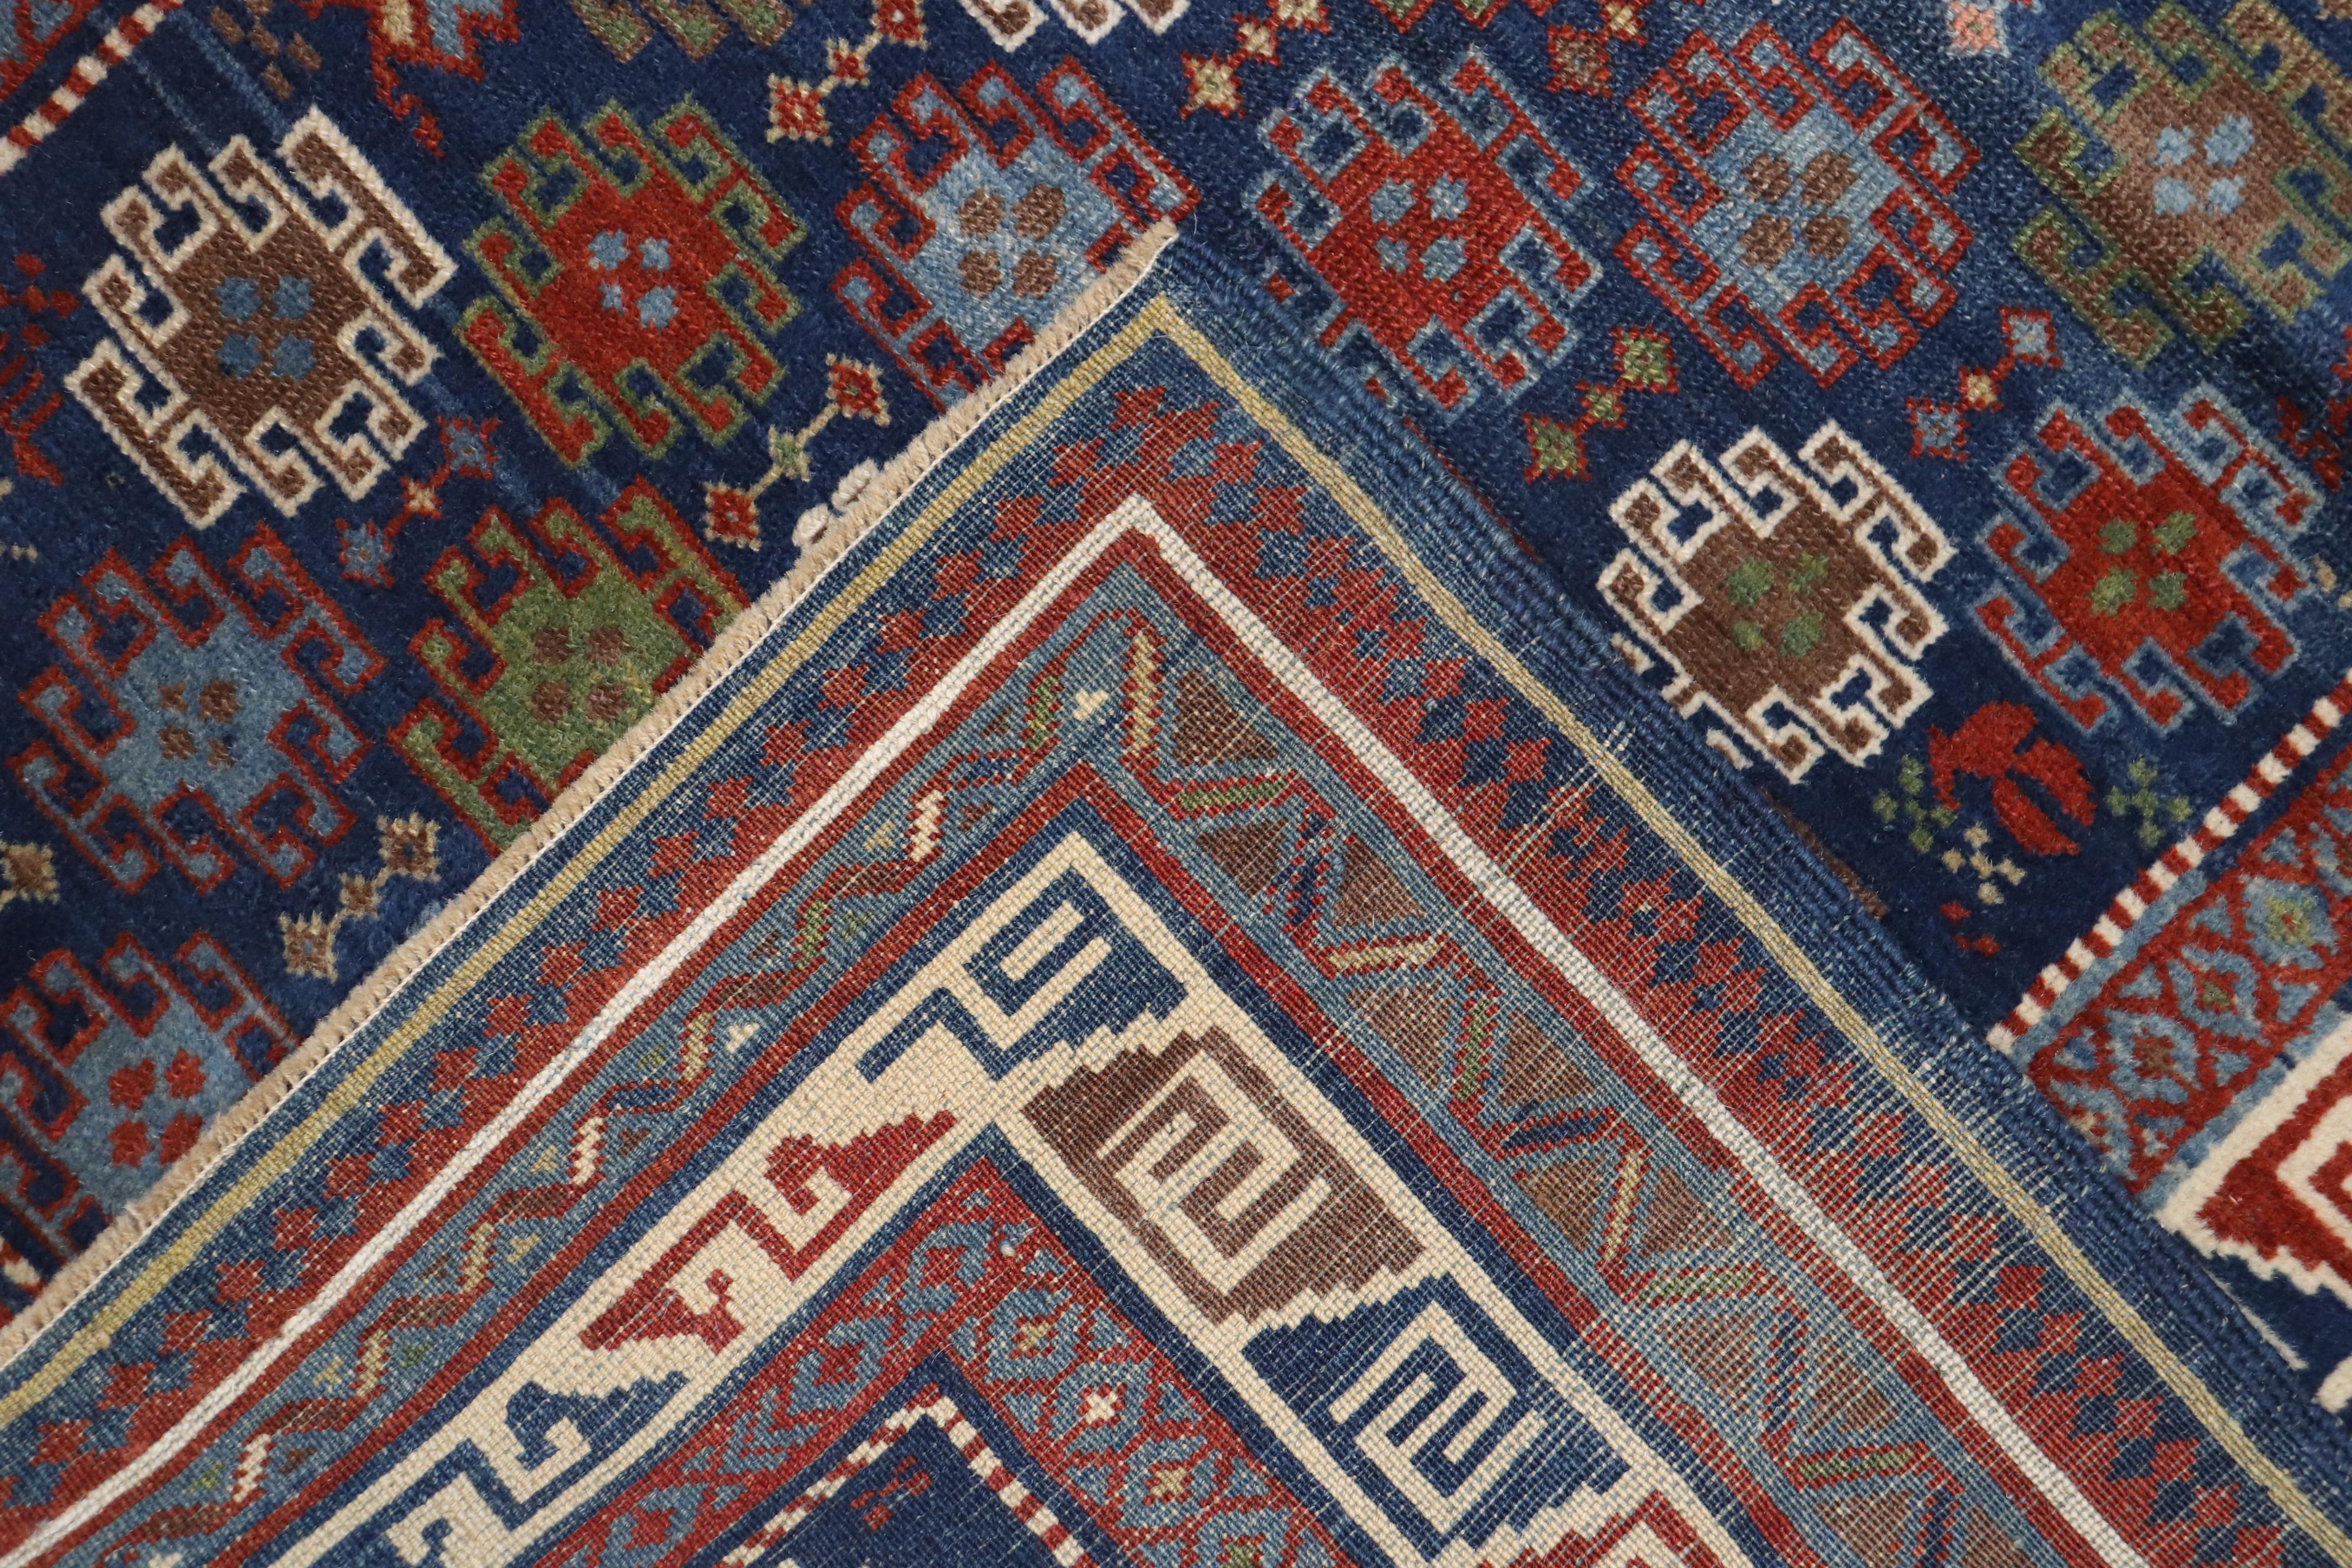 A Caucasian Kuba rug from the early 20th Century

Measures: 3'5'' x 5'

Antique Caucasian rugs from the Shirvan district village are still considered one of the best decorative and collector type of rugs from that the Caucasian regions/villages.